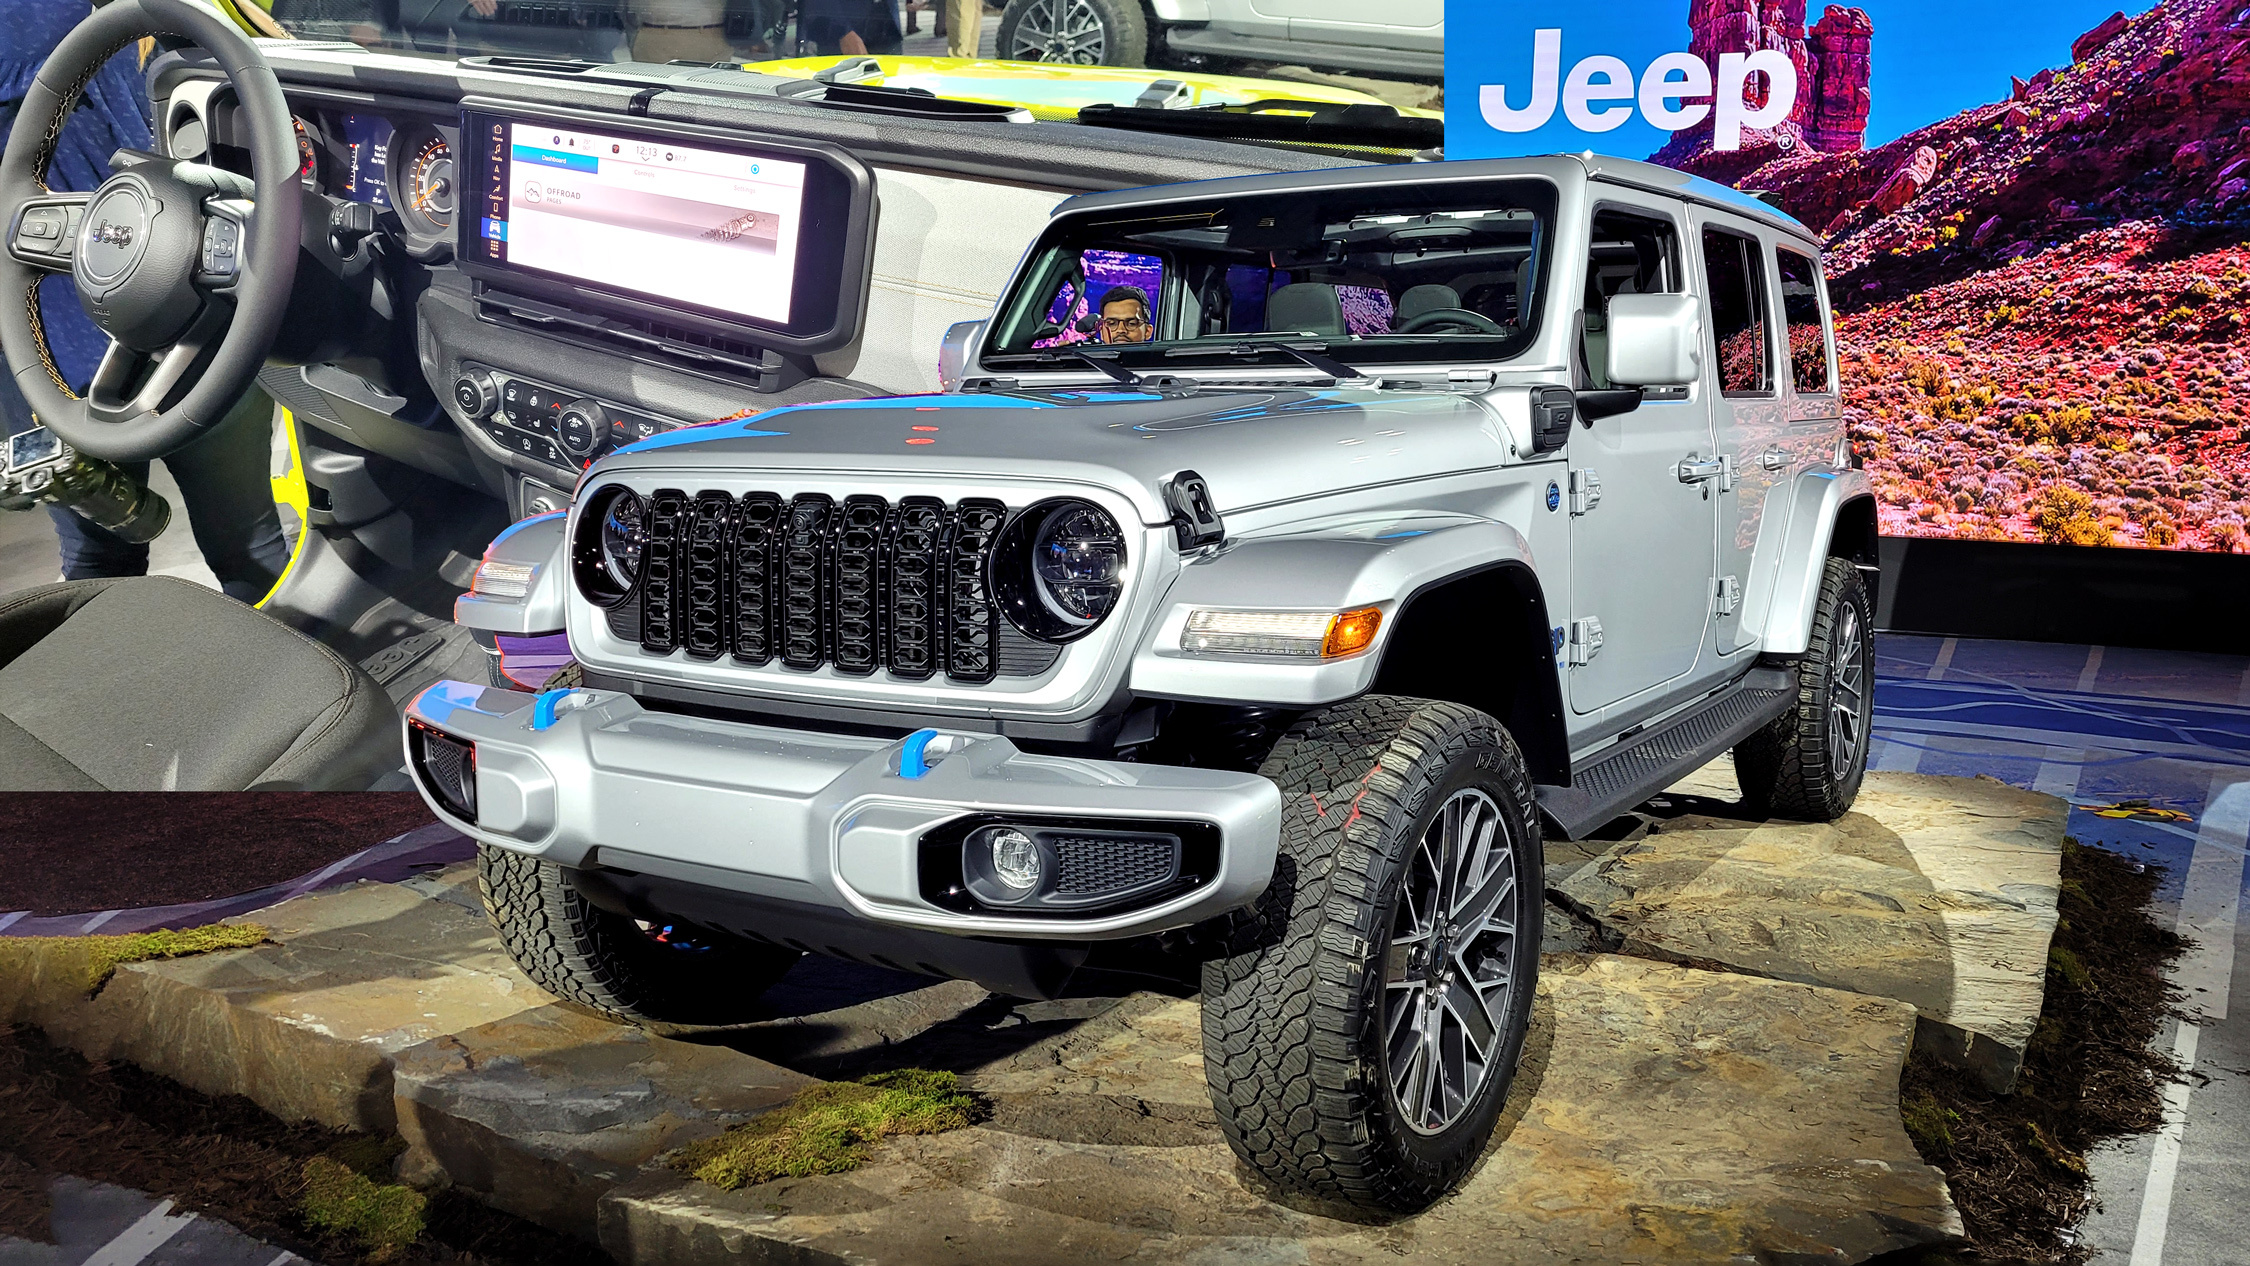 2024 Jeep Wrangler Gets A Divisive Face But A Welcome New Interior, More  Off-Road Chops